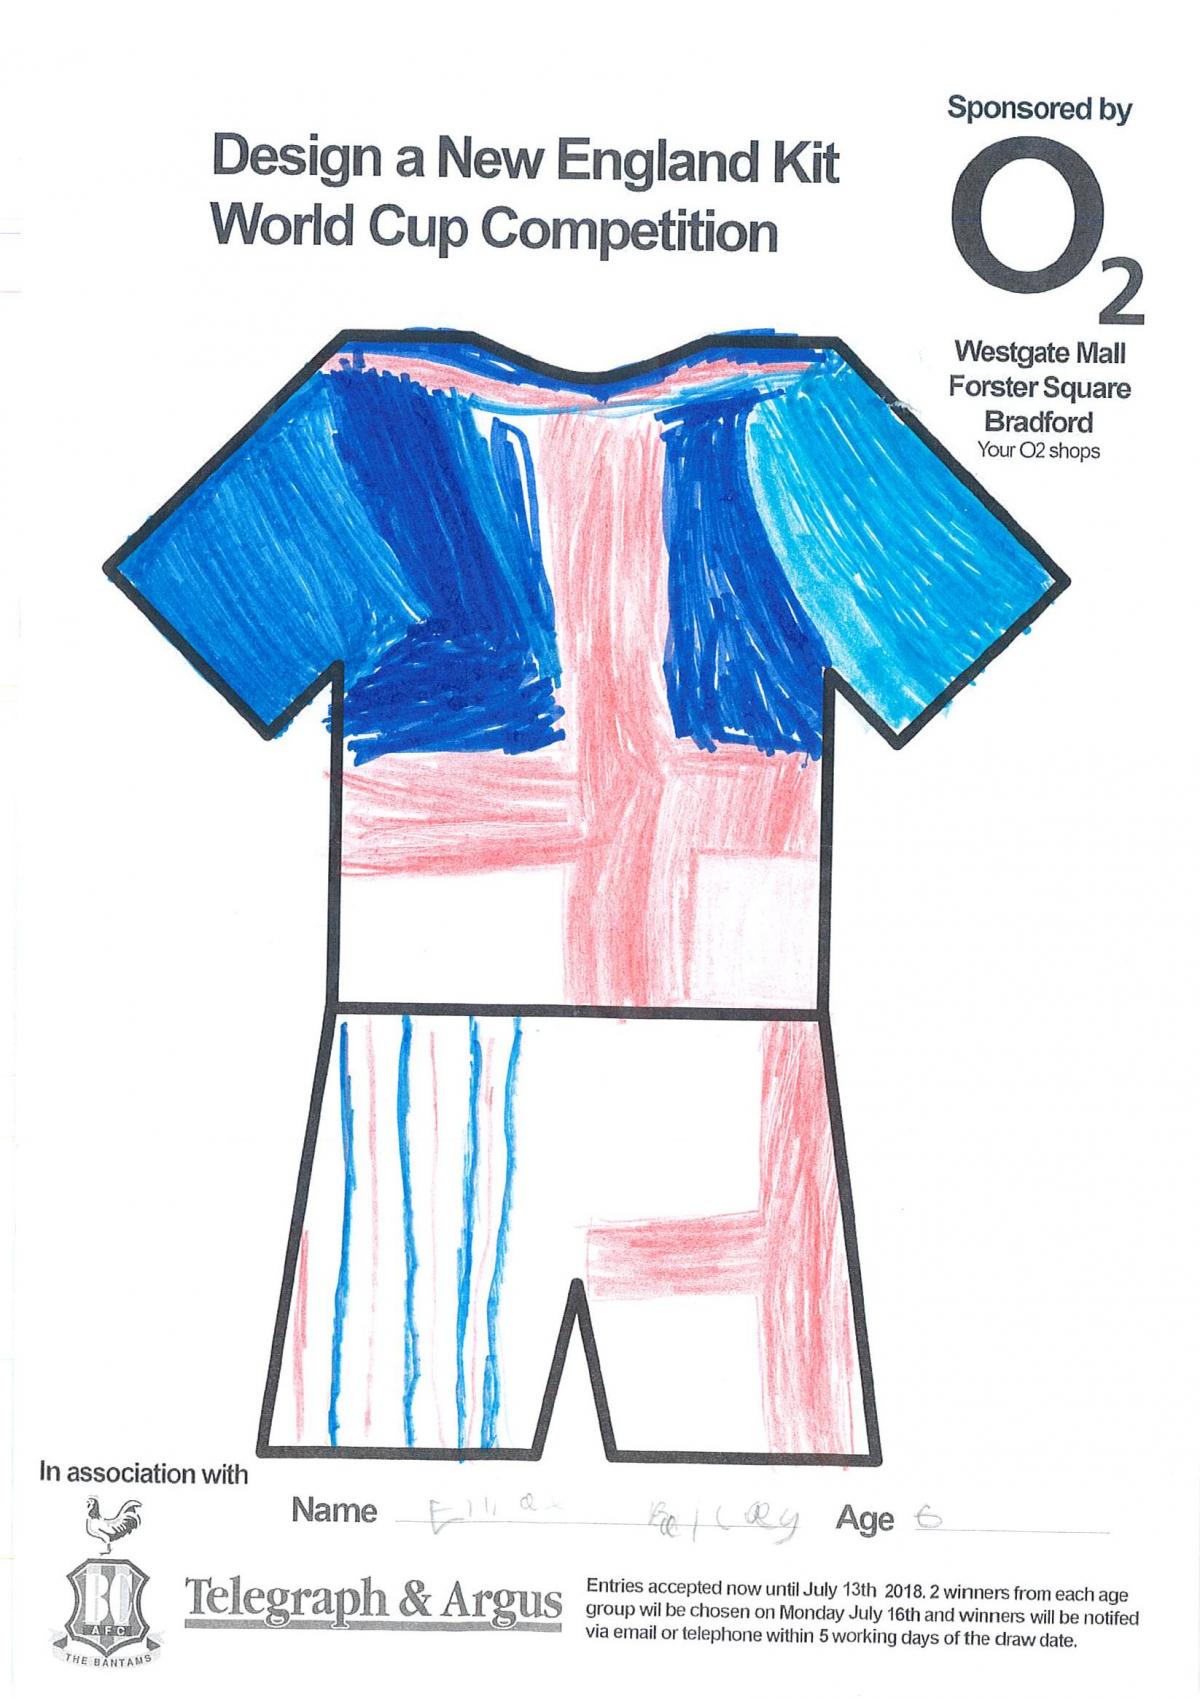 World Cup kit competition